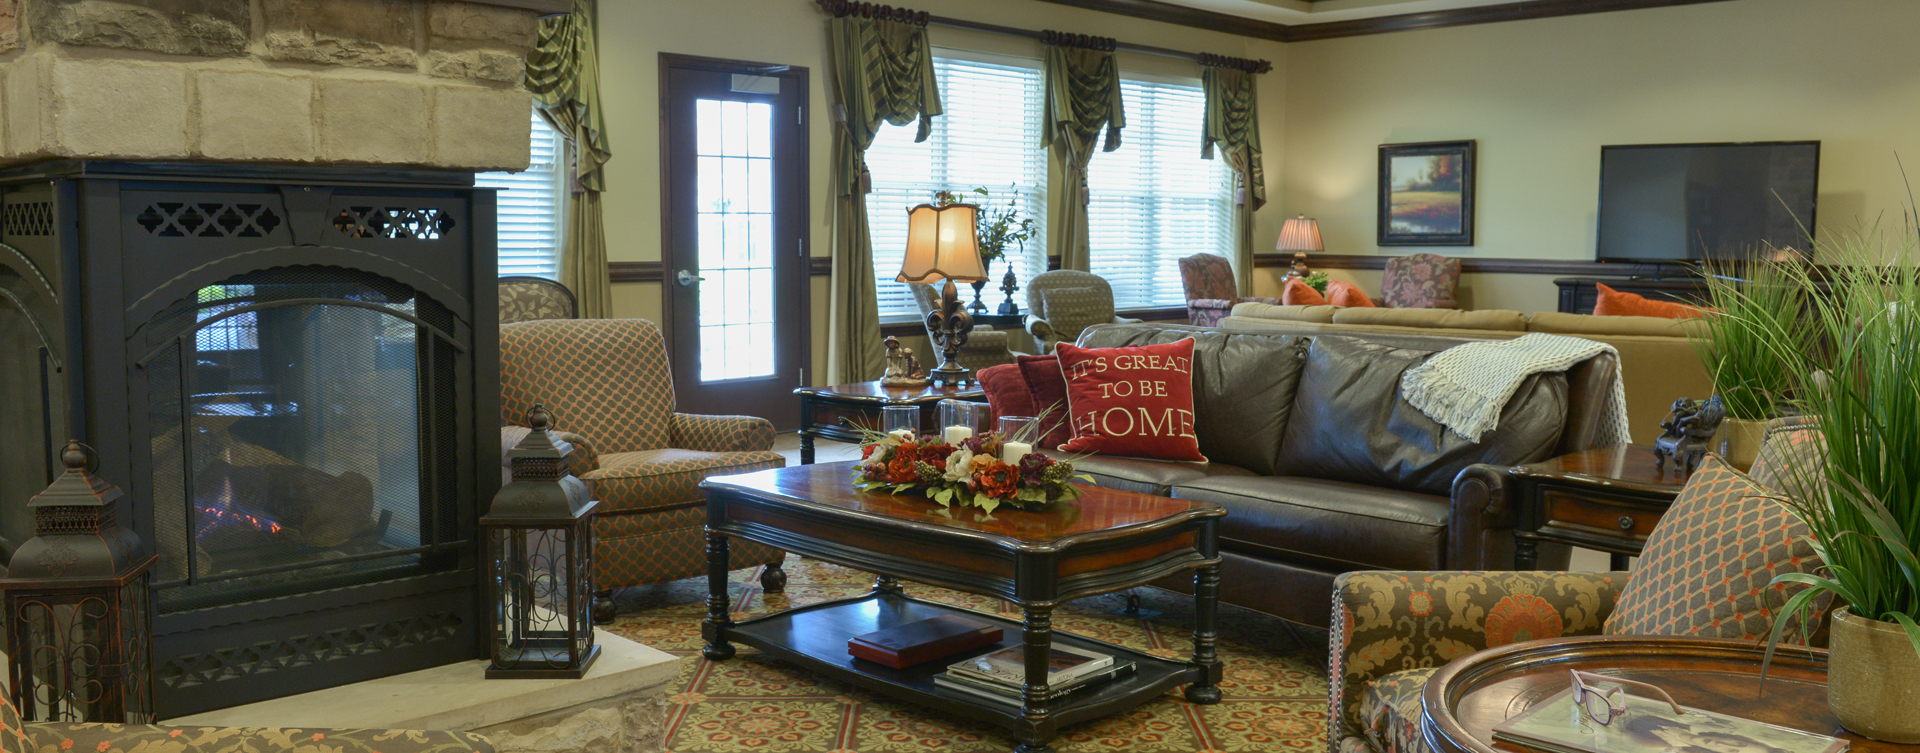 Snooze in your favorite chair in the living room at Bickford of Crown Point